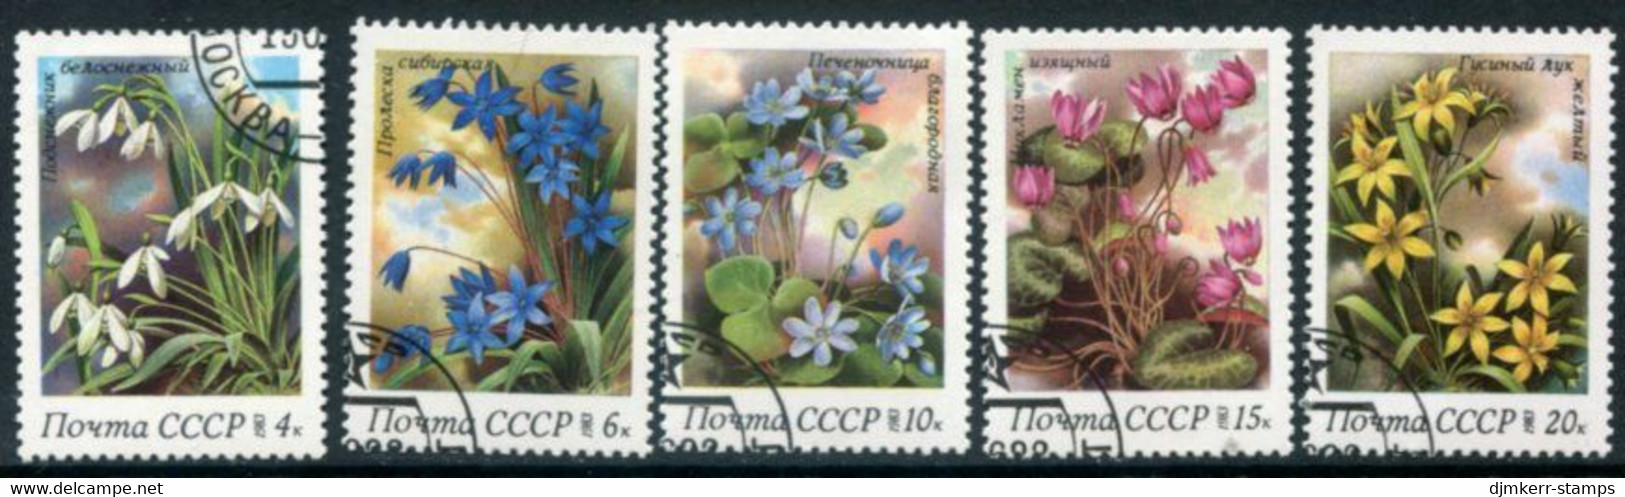 SOVIET UNION 1983 Spring Flowers Used.  Michel 5278-82 - Used Stamps